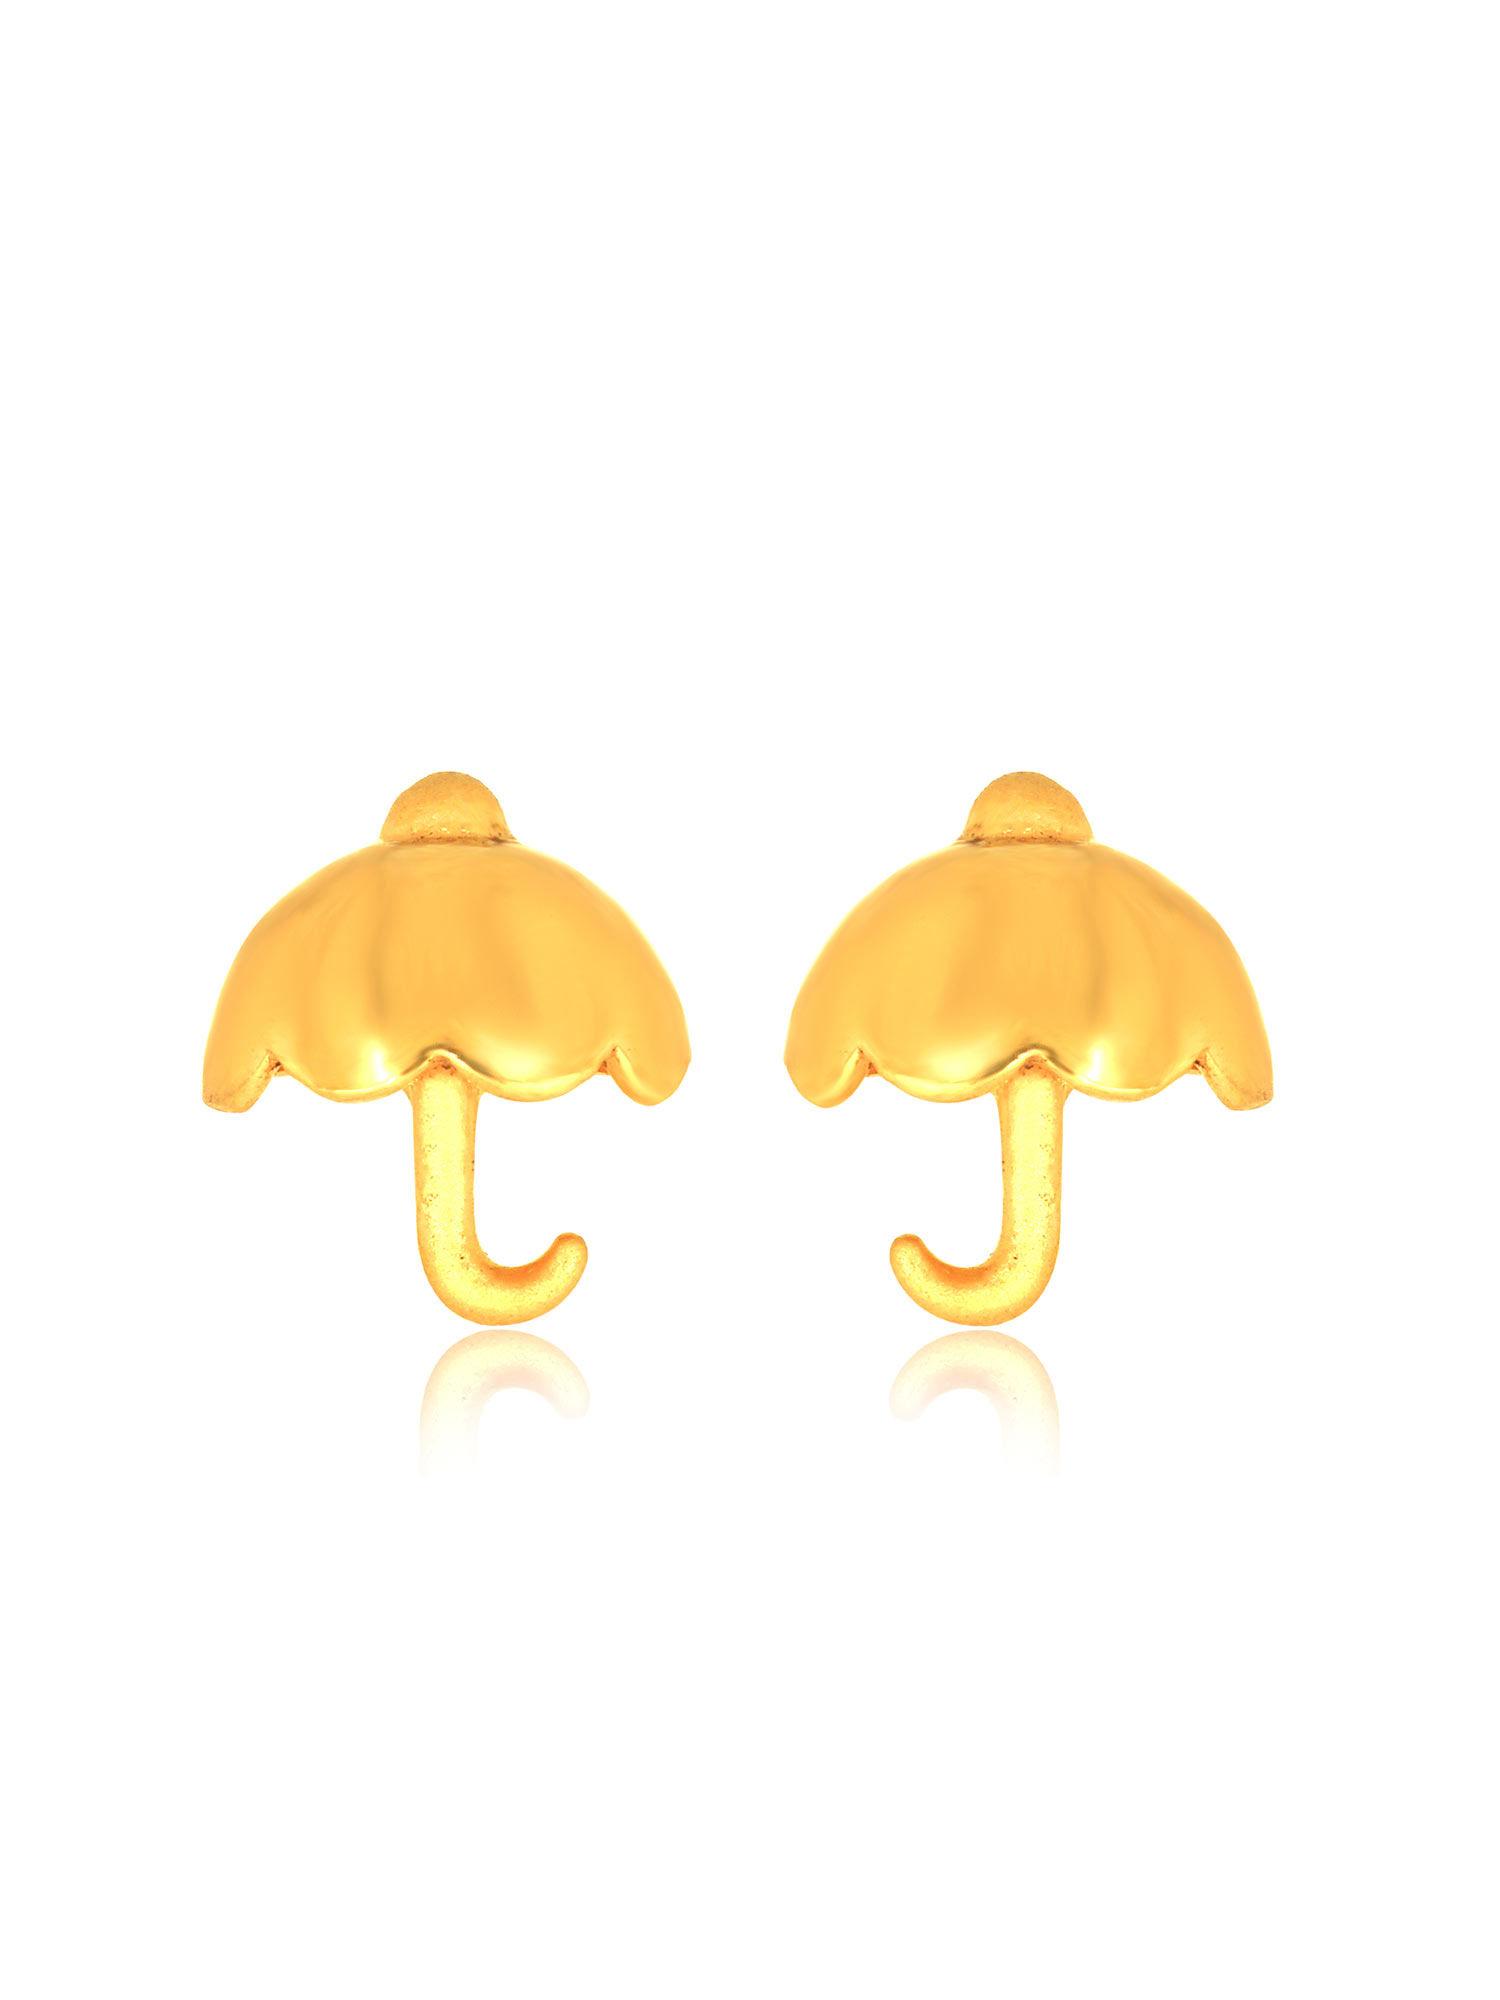 gold 22k yellow gold adorable umbrella gold baby studs earrings